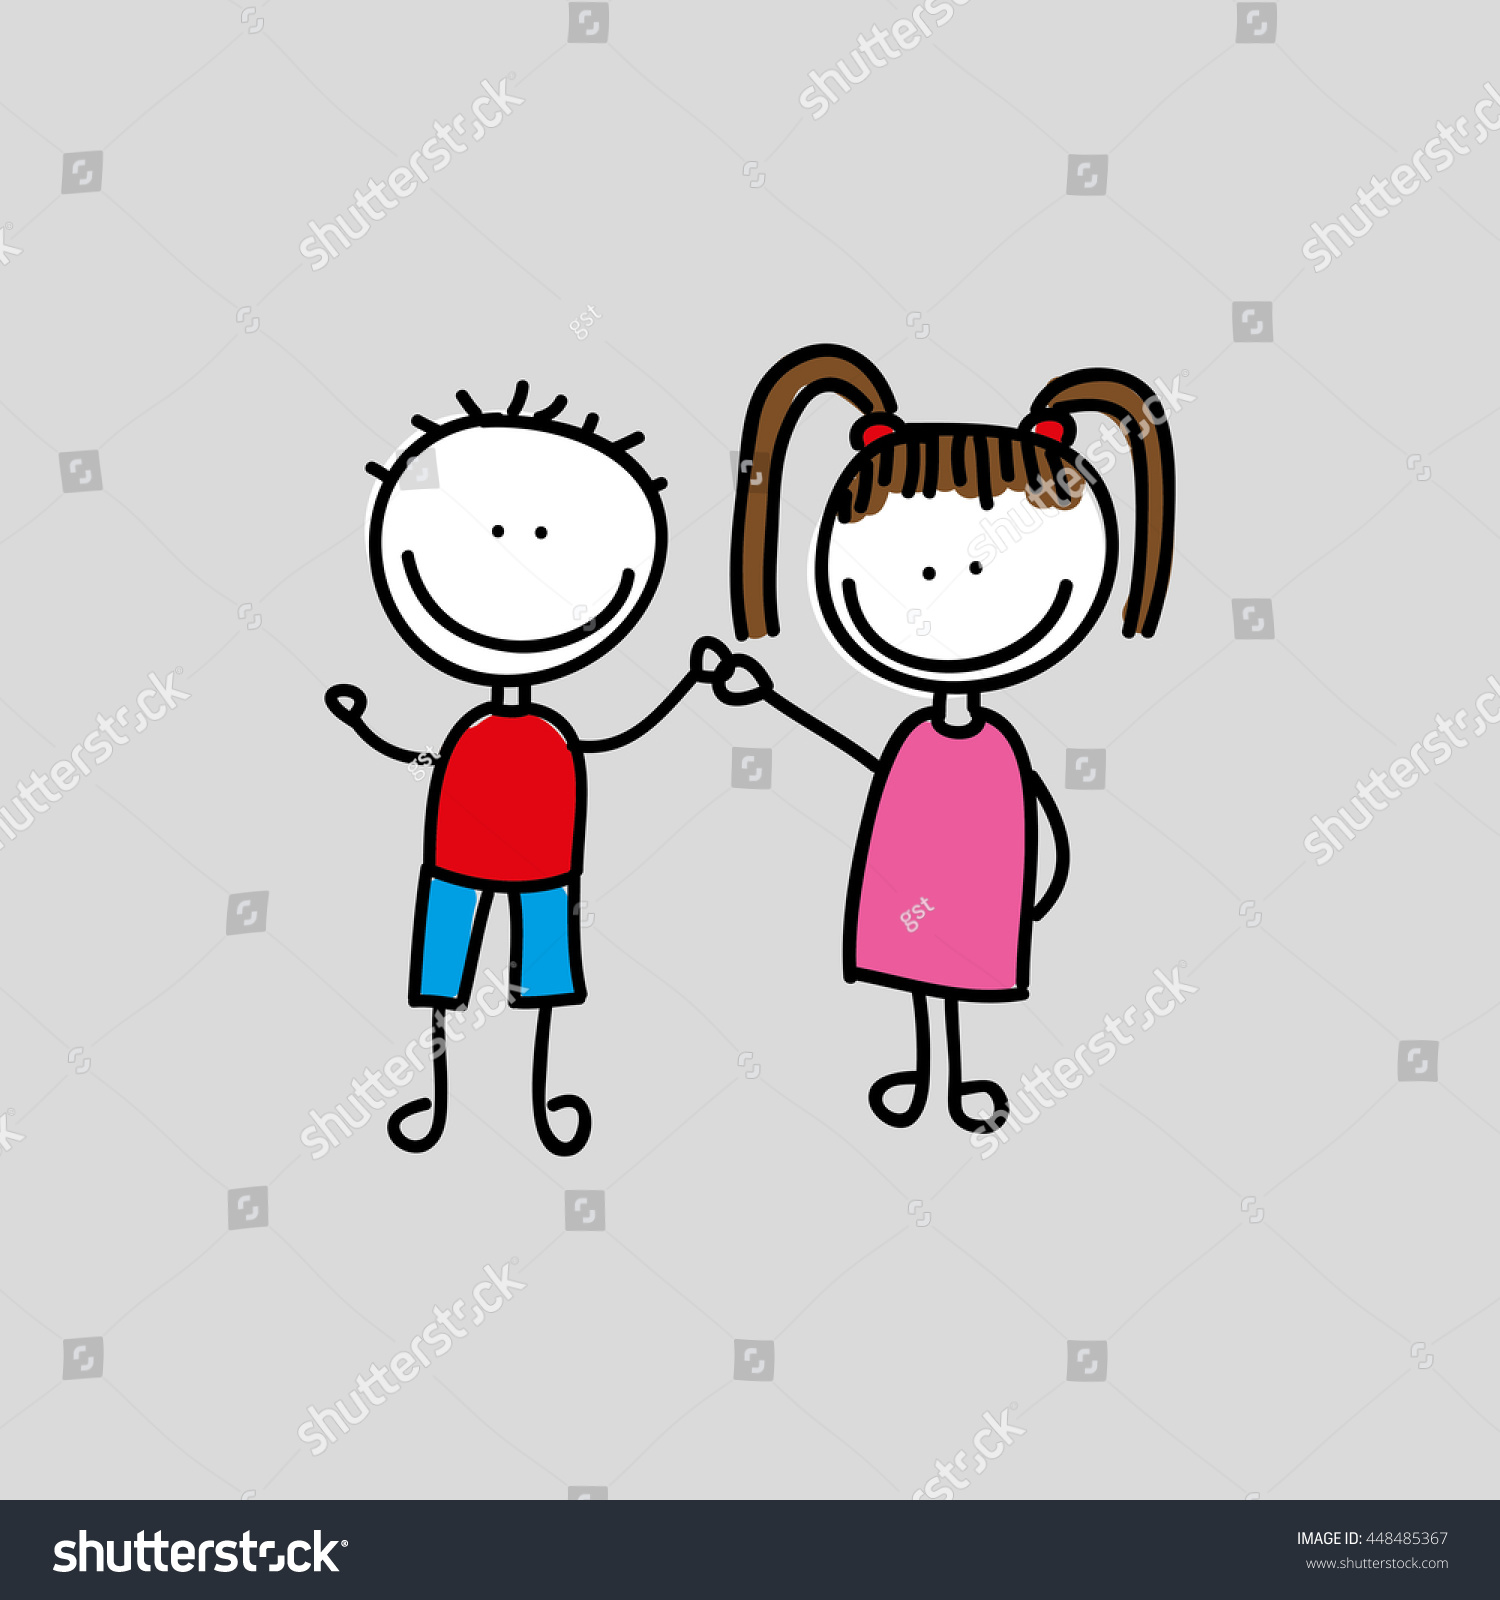 Lovely Family Icon Two Sons Vector Stock Vector 448485367 - Shutterstock